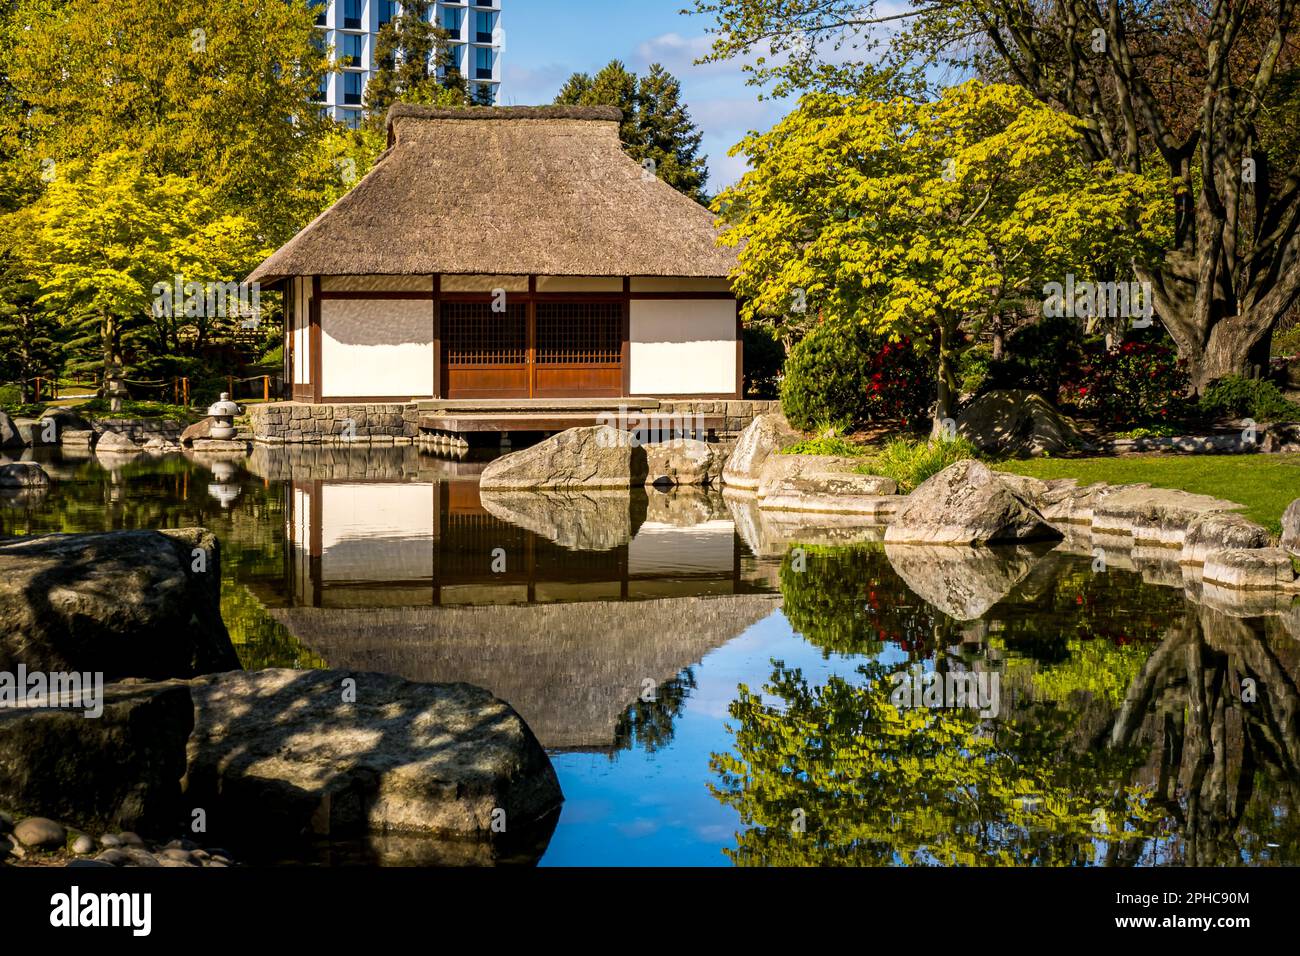 The picturesque Japanese tea house in the morning sun, surrounding scenic rocks and nature mirroring in the water of a pond, a tranquil setting. Stock Photo